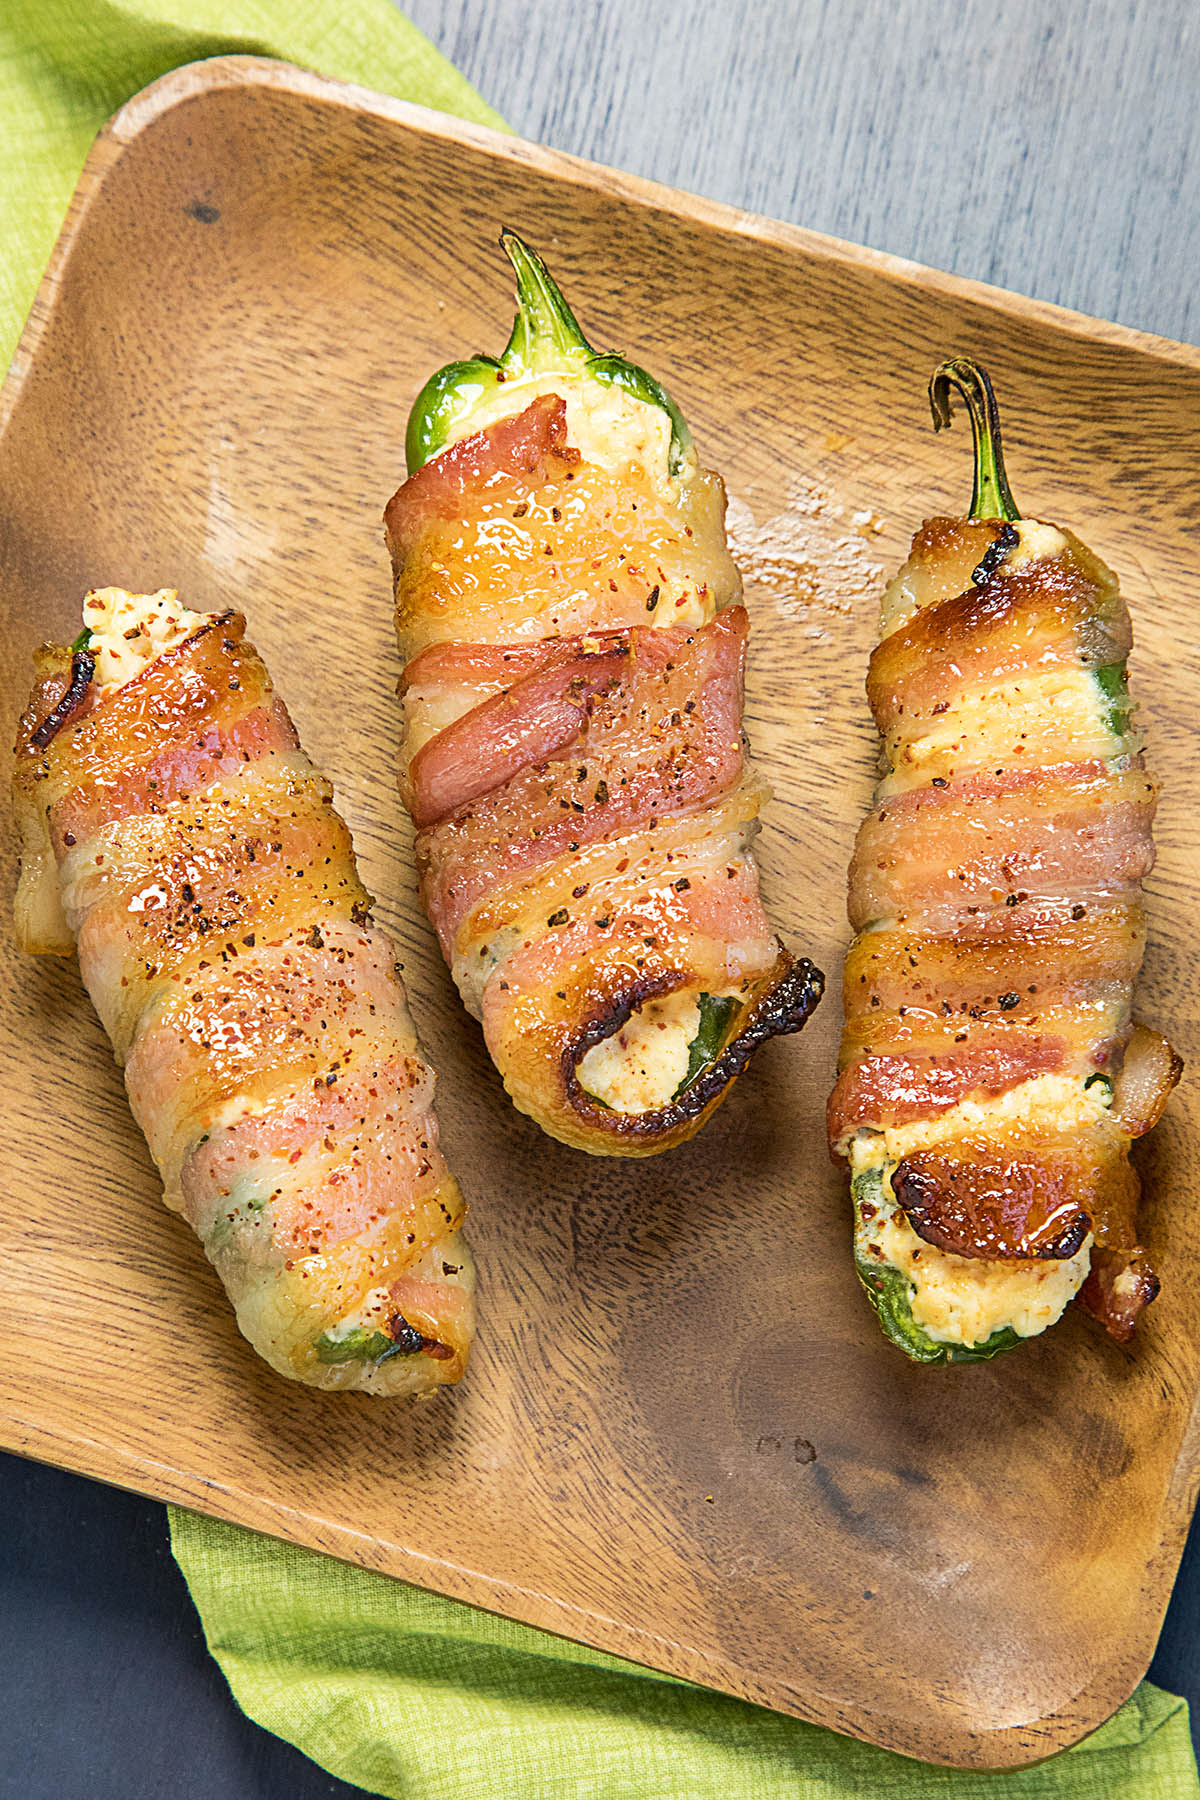 Candied Bacon Jalapeno Poppers - Recipe